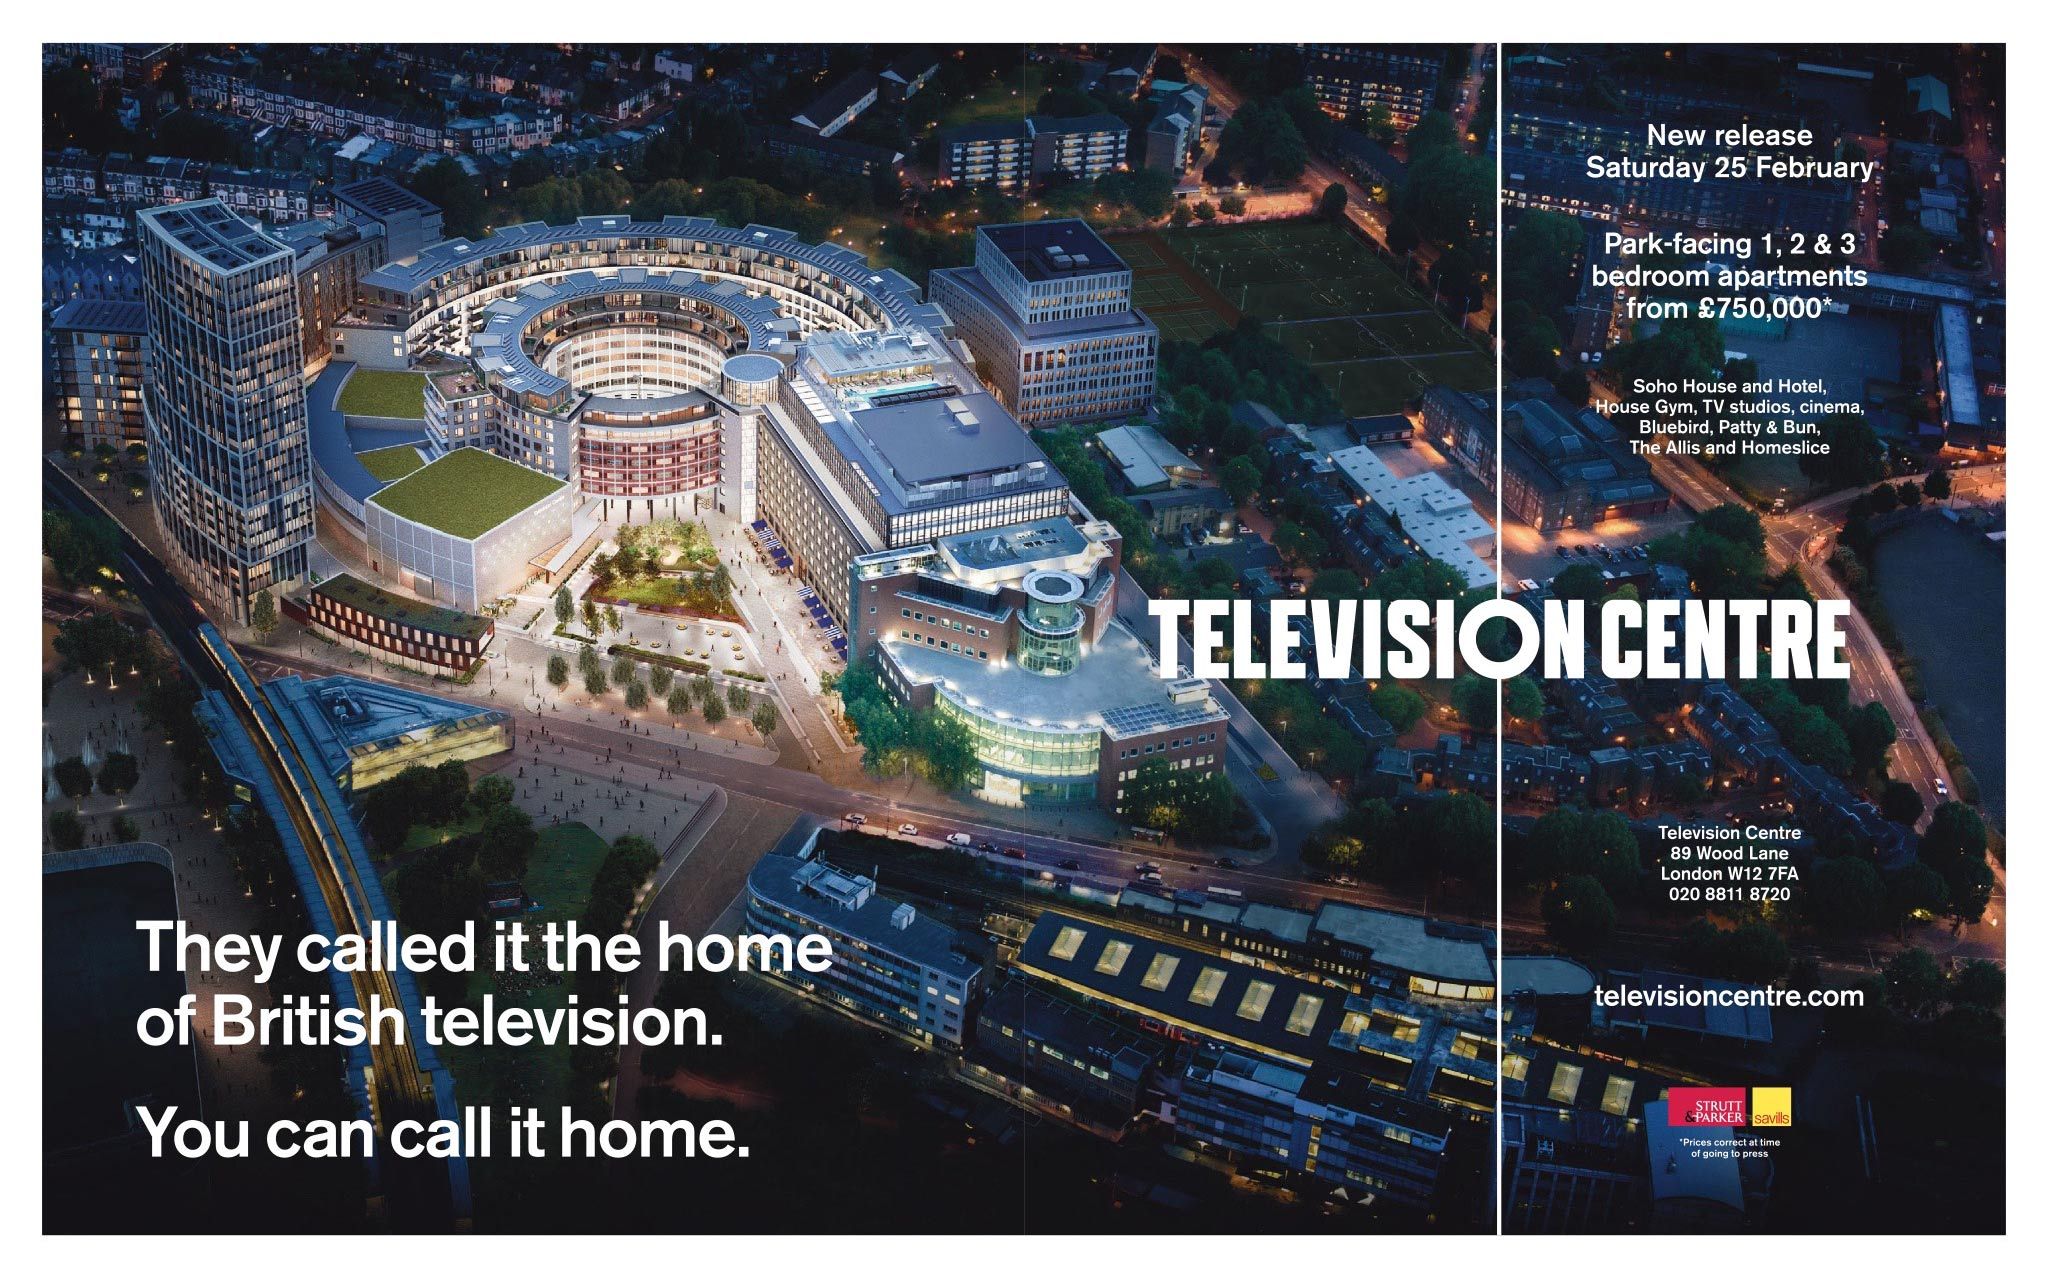 Television Centre London W12 Homes & Property ad Feb 2017